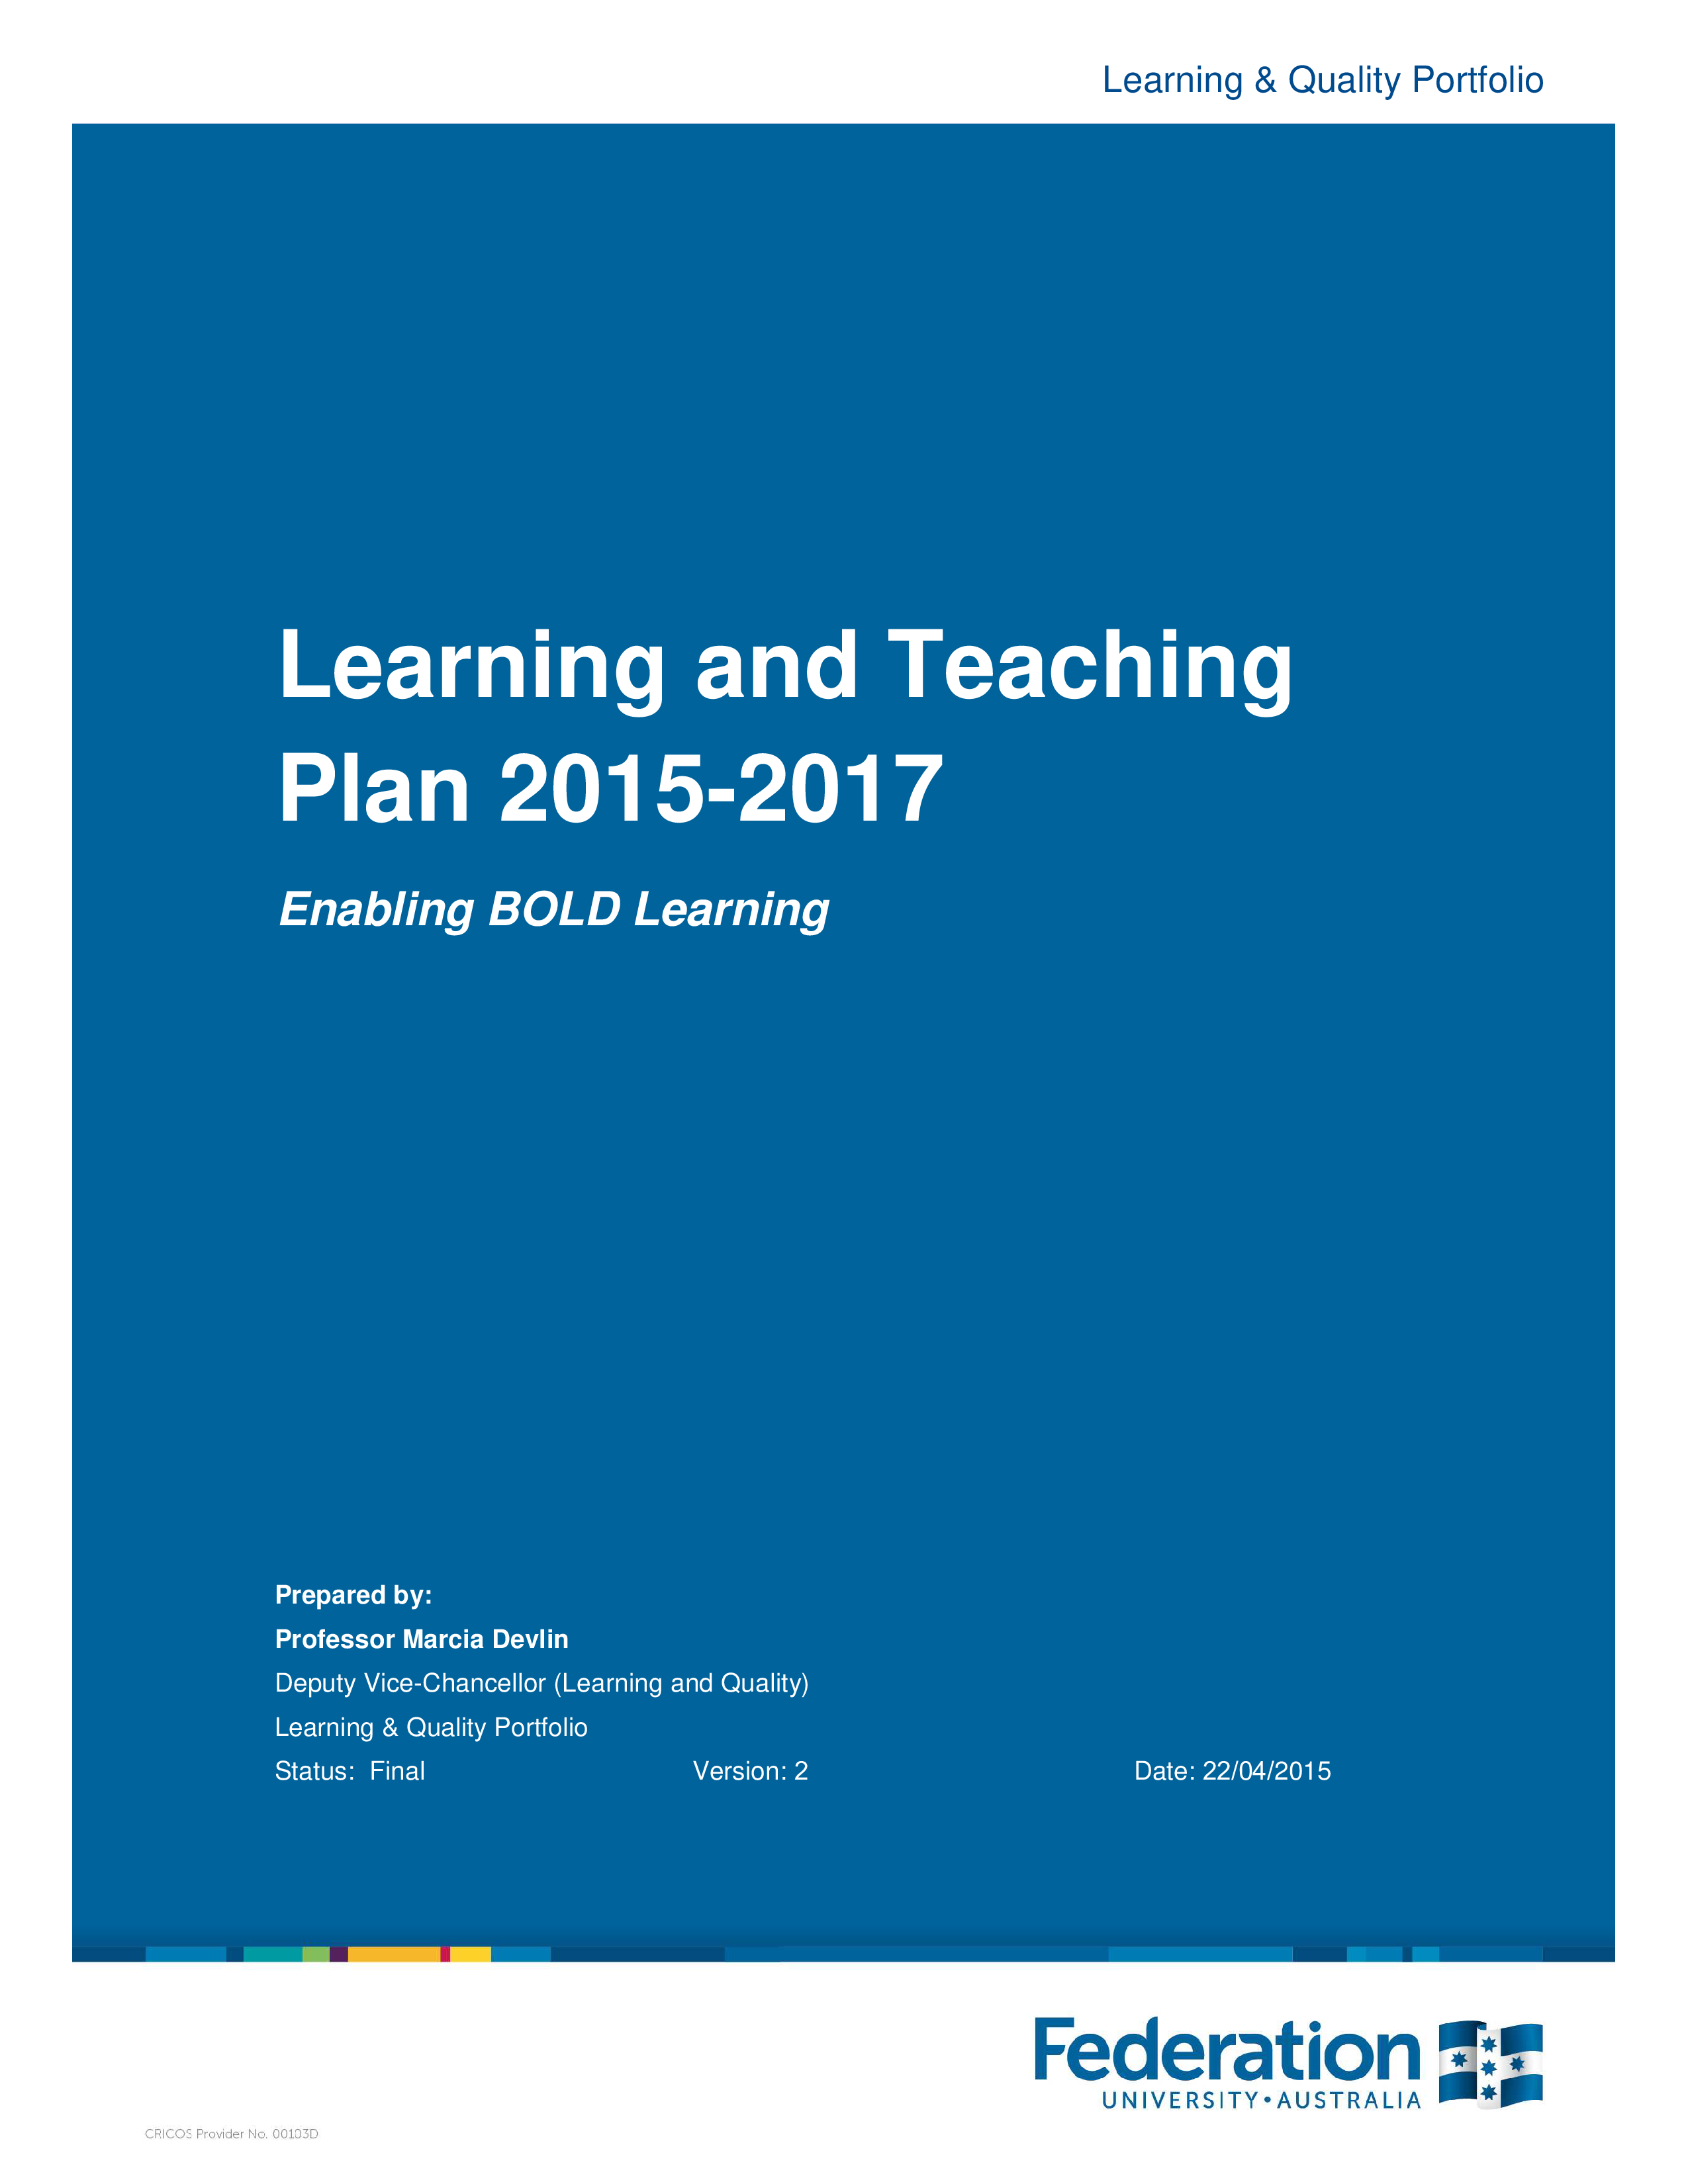 business plan e learning template